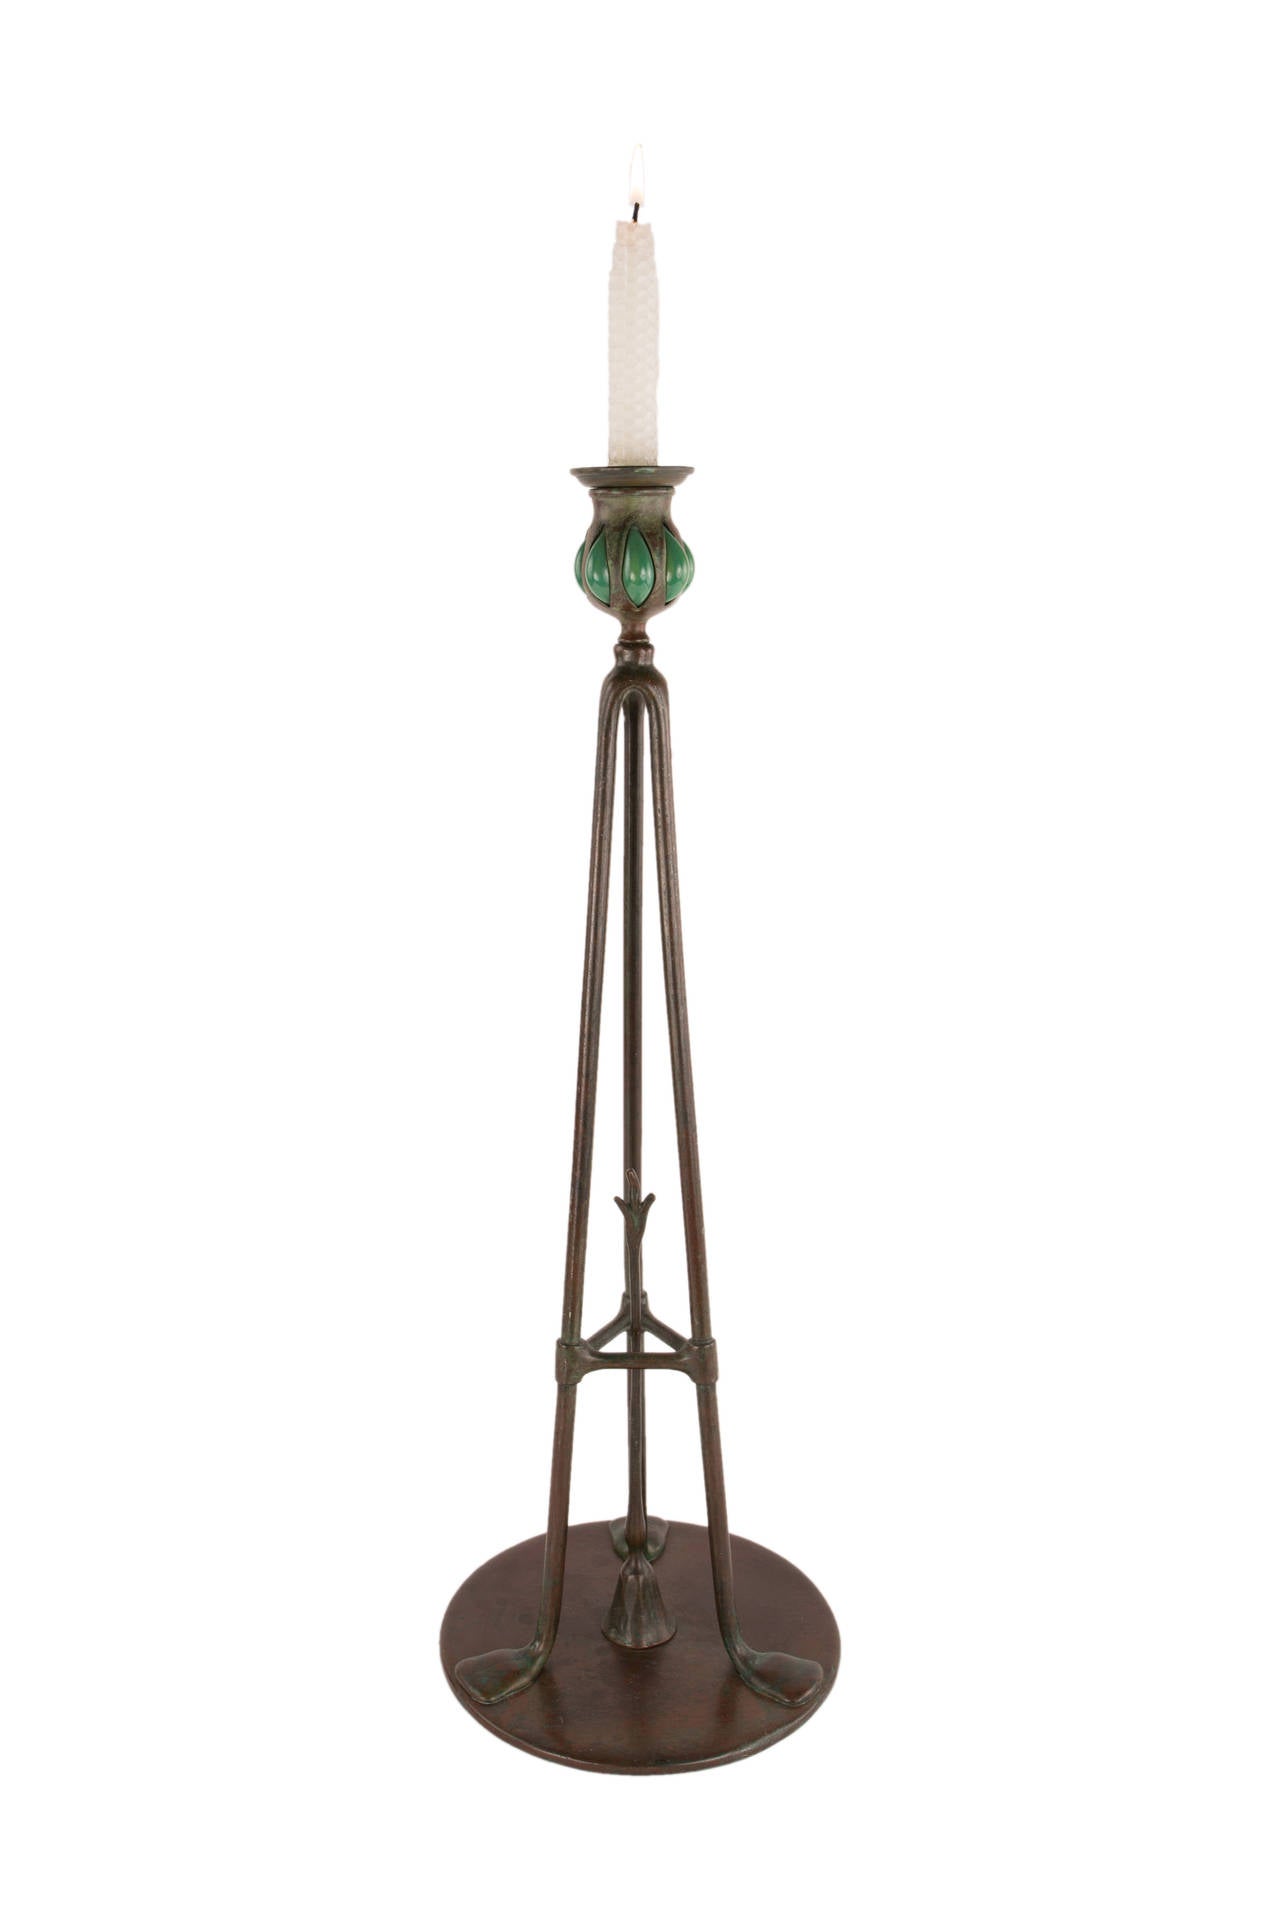 A fine and rare American Art Nouveau patinated bronze and glass candlestick decorated with green glass blown out candleholder a top a three legged tripod form a top a circular platform further decorated with snuffer set in the center decorated as a